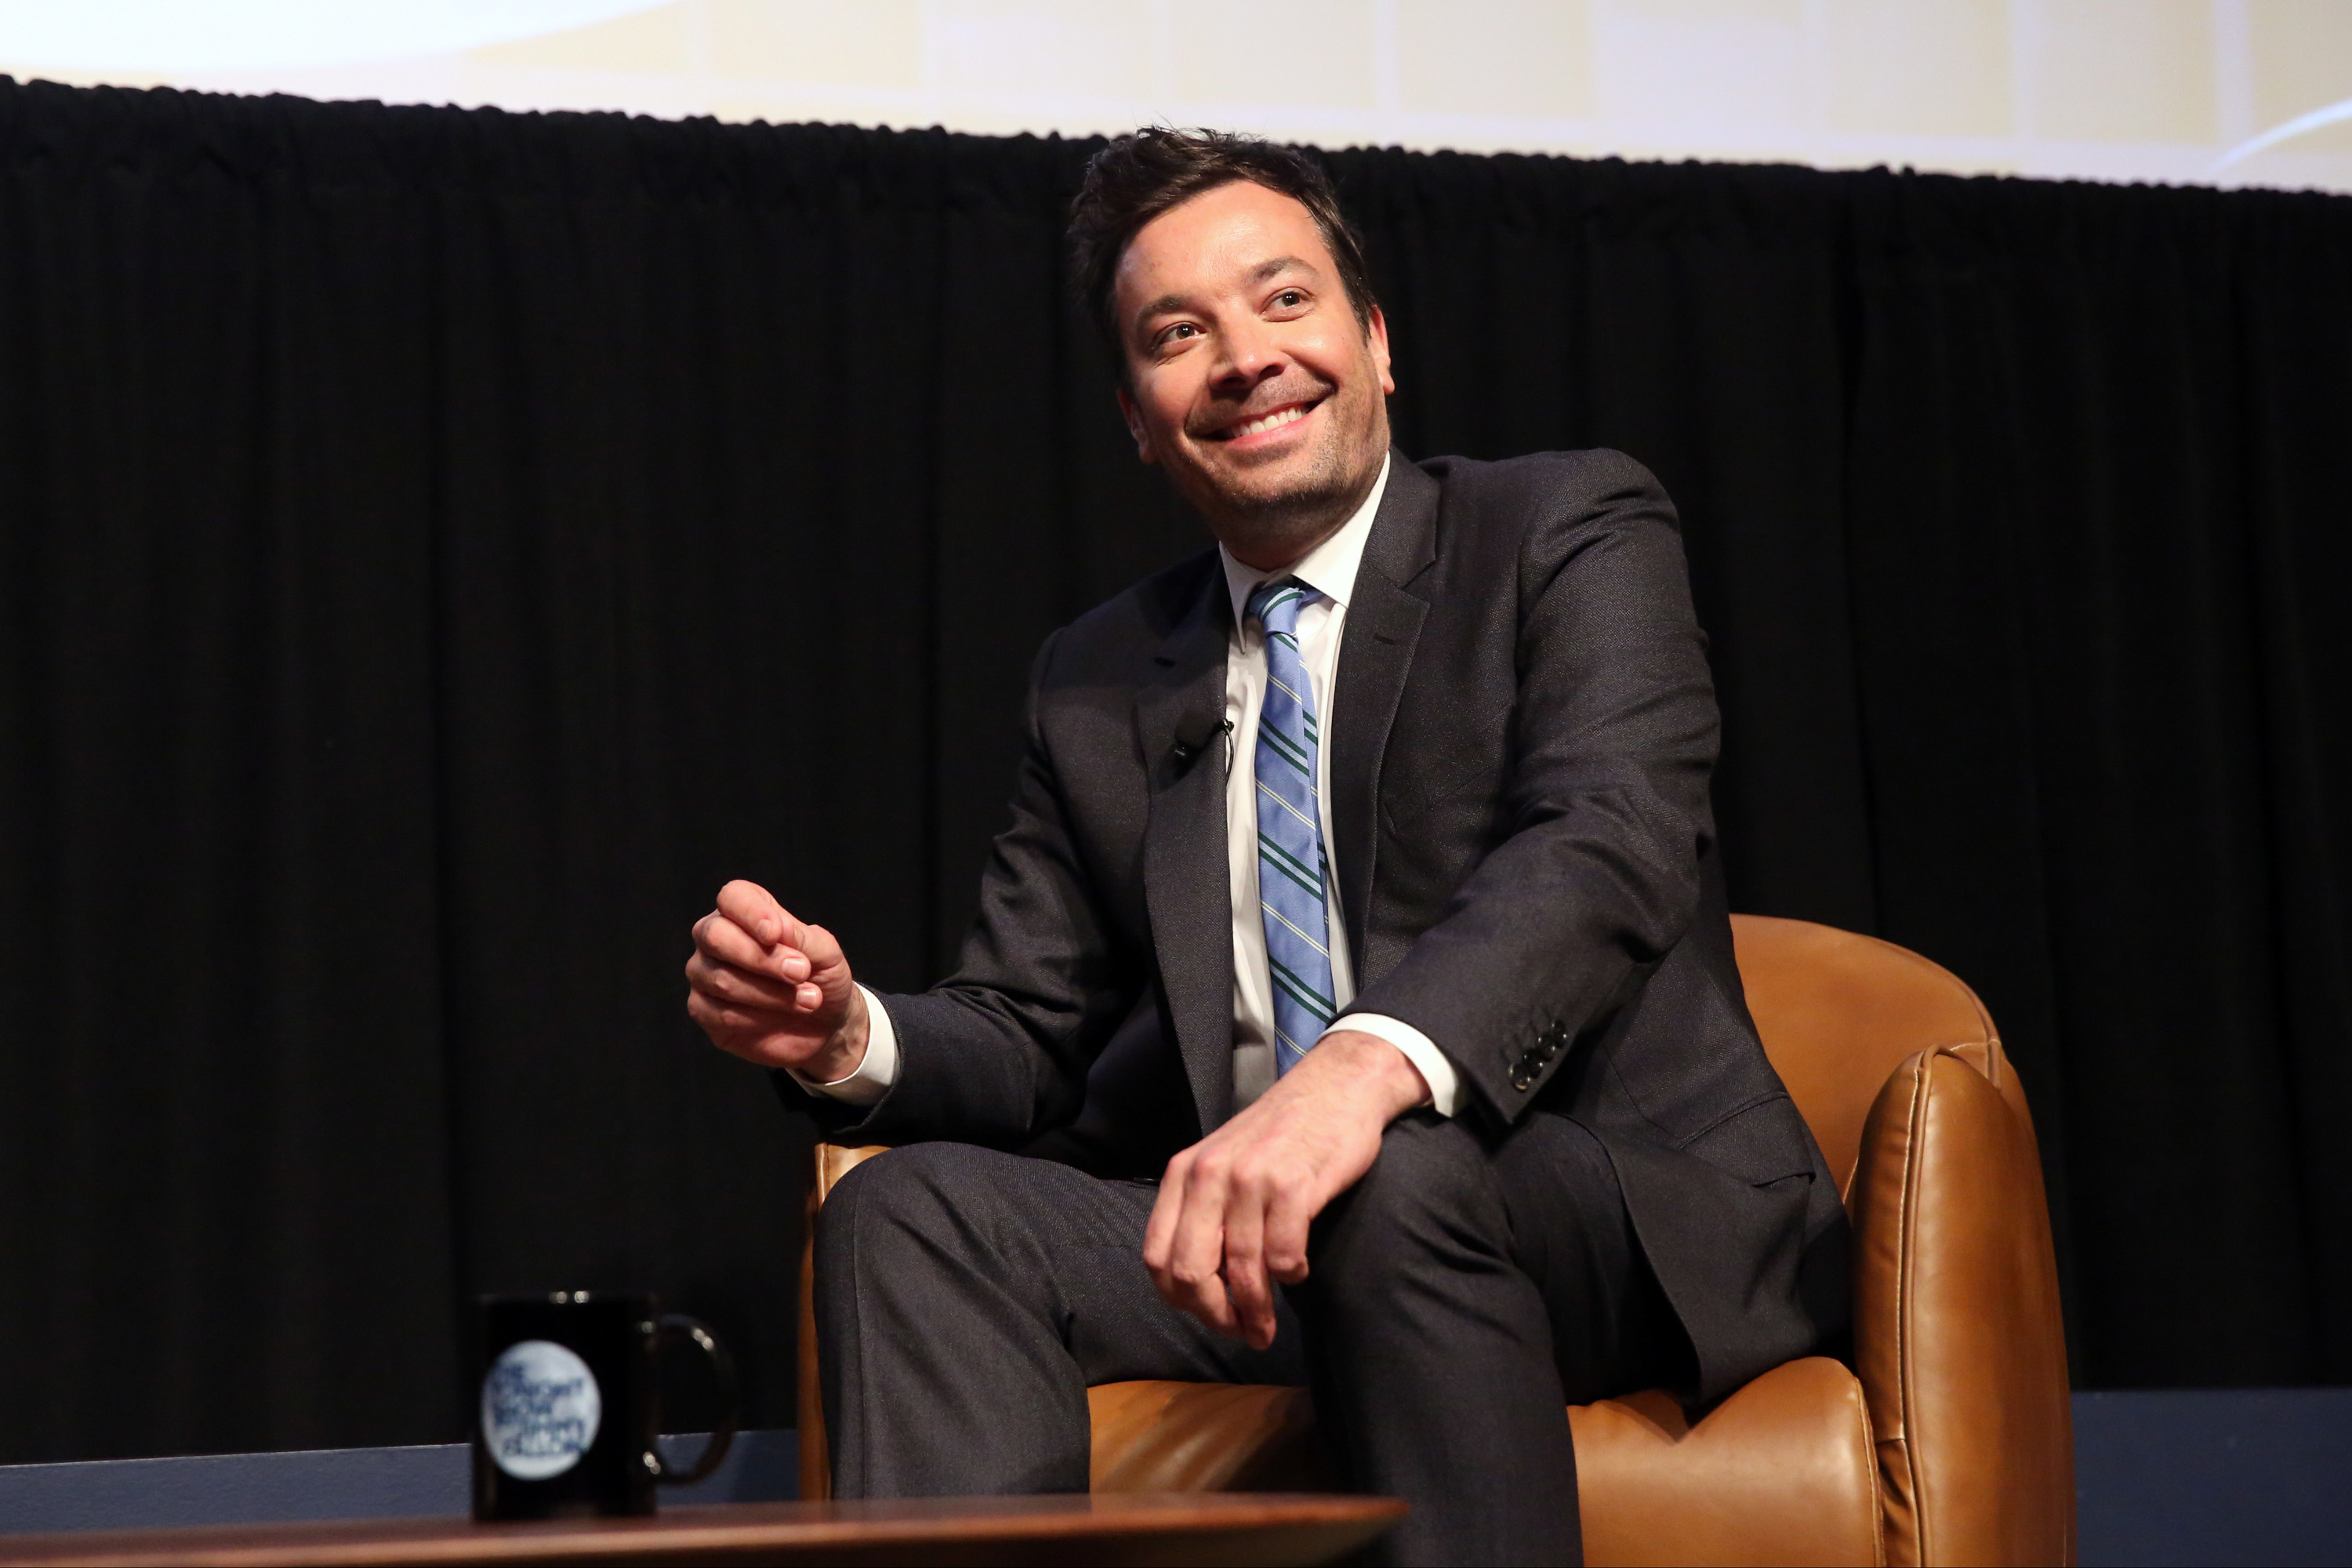 A close-up of Jimmy Fallon sitting and smiling